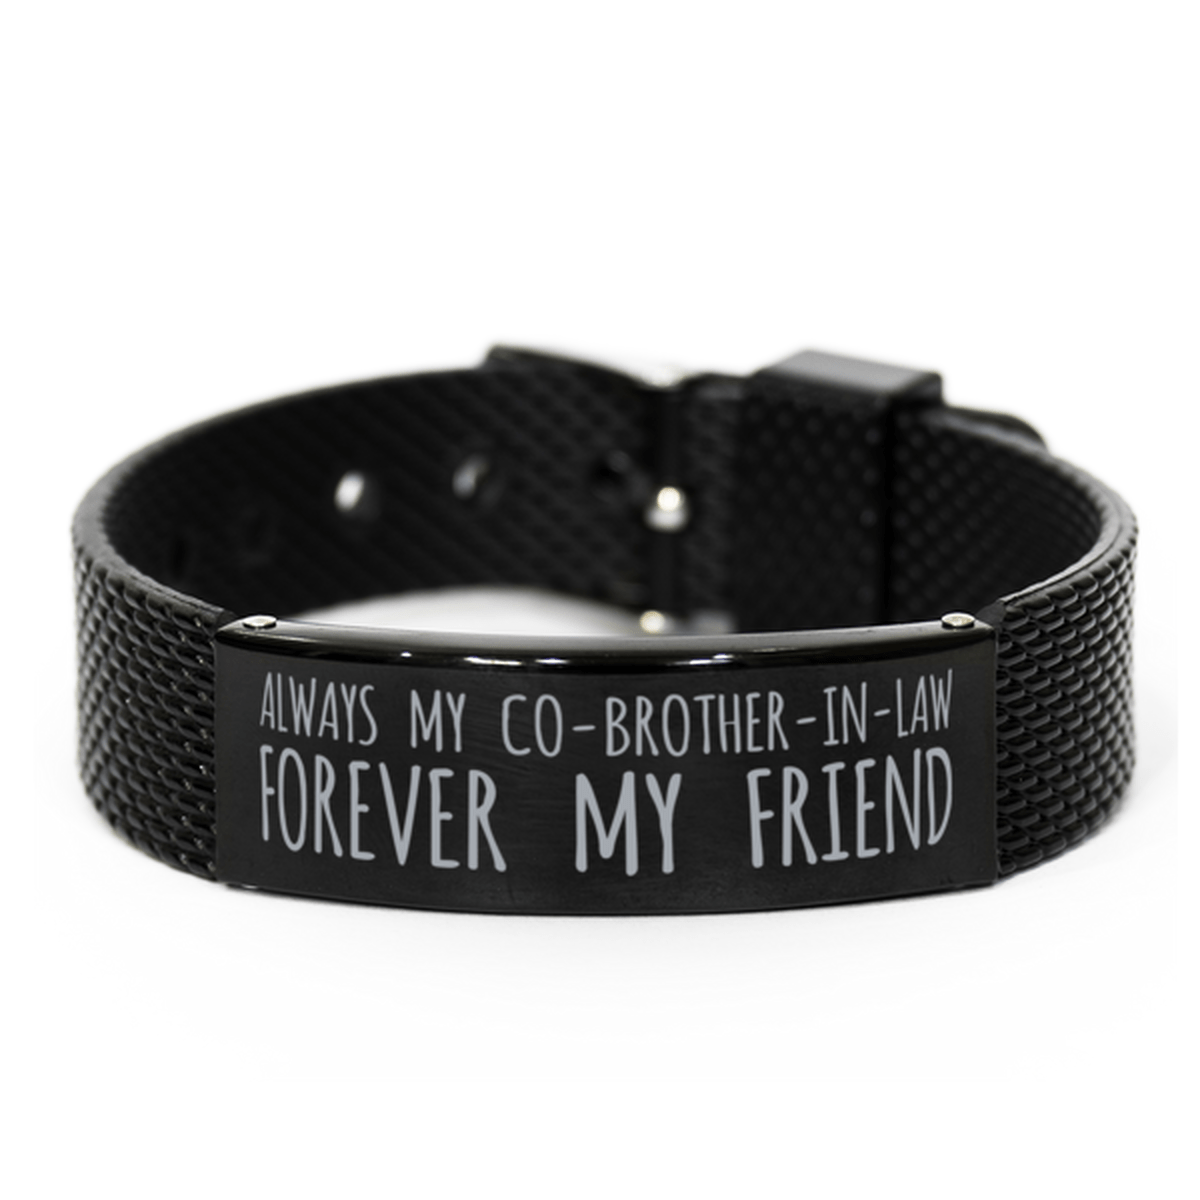 Inspirational Co-Brother-In-Law Black Shark Mesh Bracelet, Always My Co-Brother-In-Law Forever My Friend, Best Birthday Gifts for Family Friends